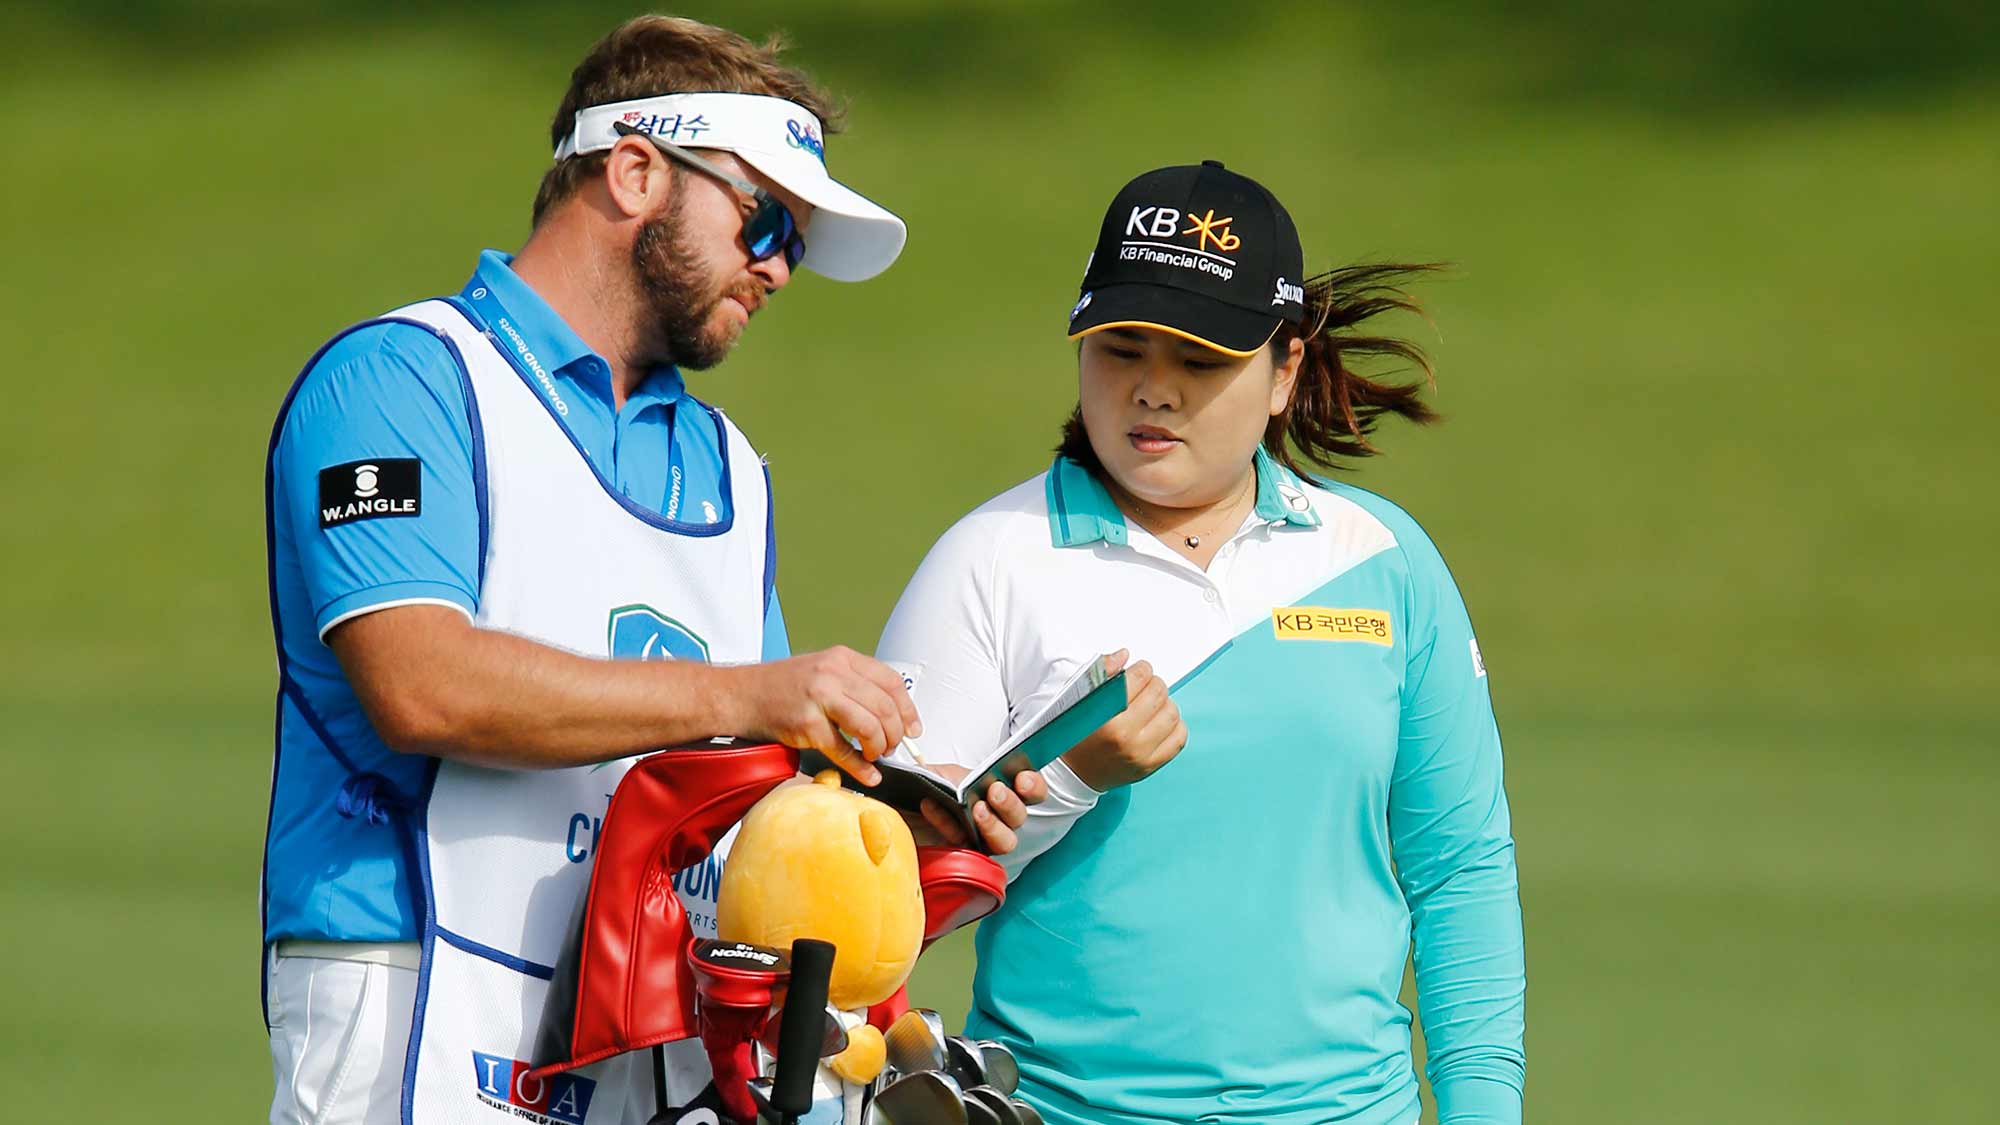 Inbee Park of South Korea talks with her caddie before playing her second shot on the 17th hole during the second round of the Diamond Resorts Tournament of Champions at Tranquilo Golf Course at Four Seasons Golf and Sports Club Orlando on January 17, 2020 in Lake Buena Vista, Florida